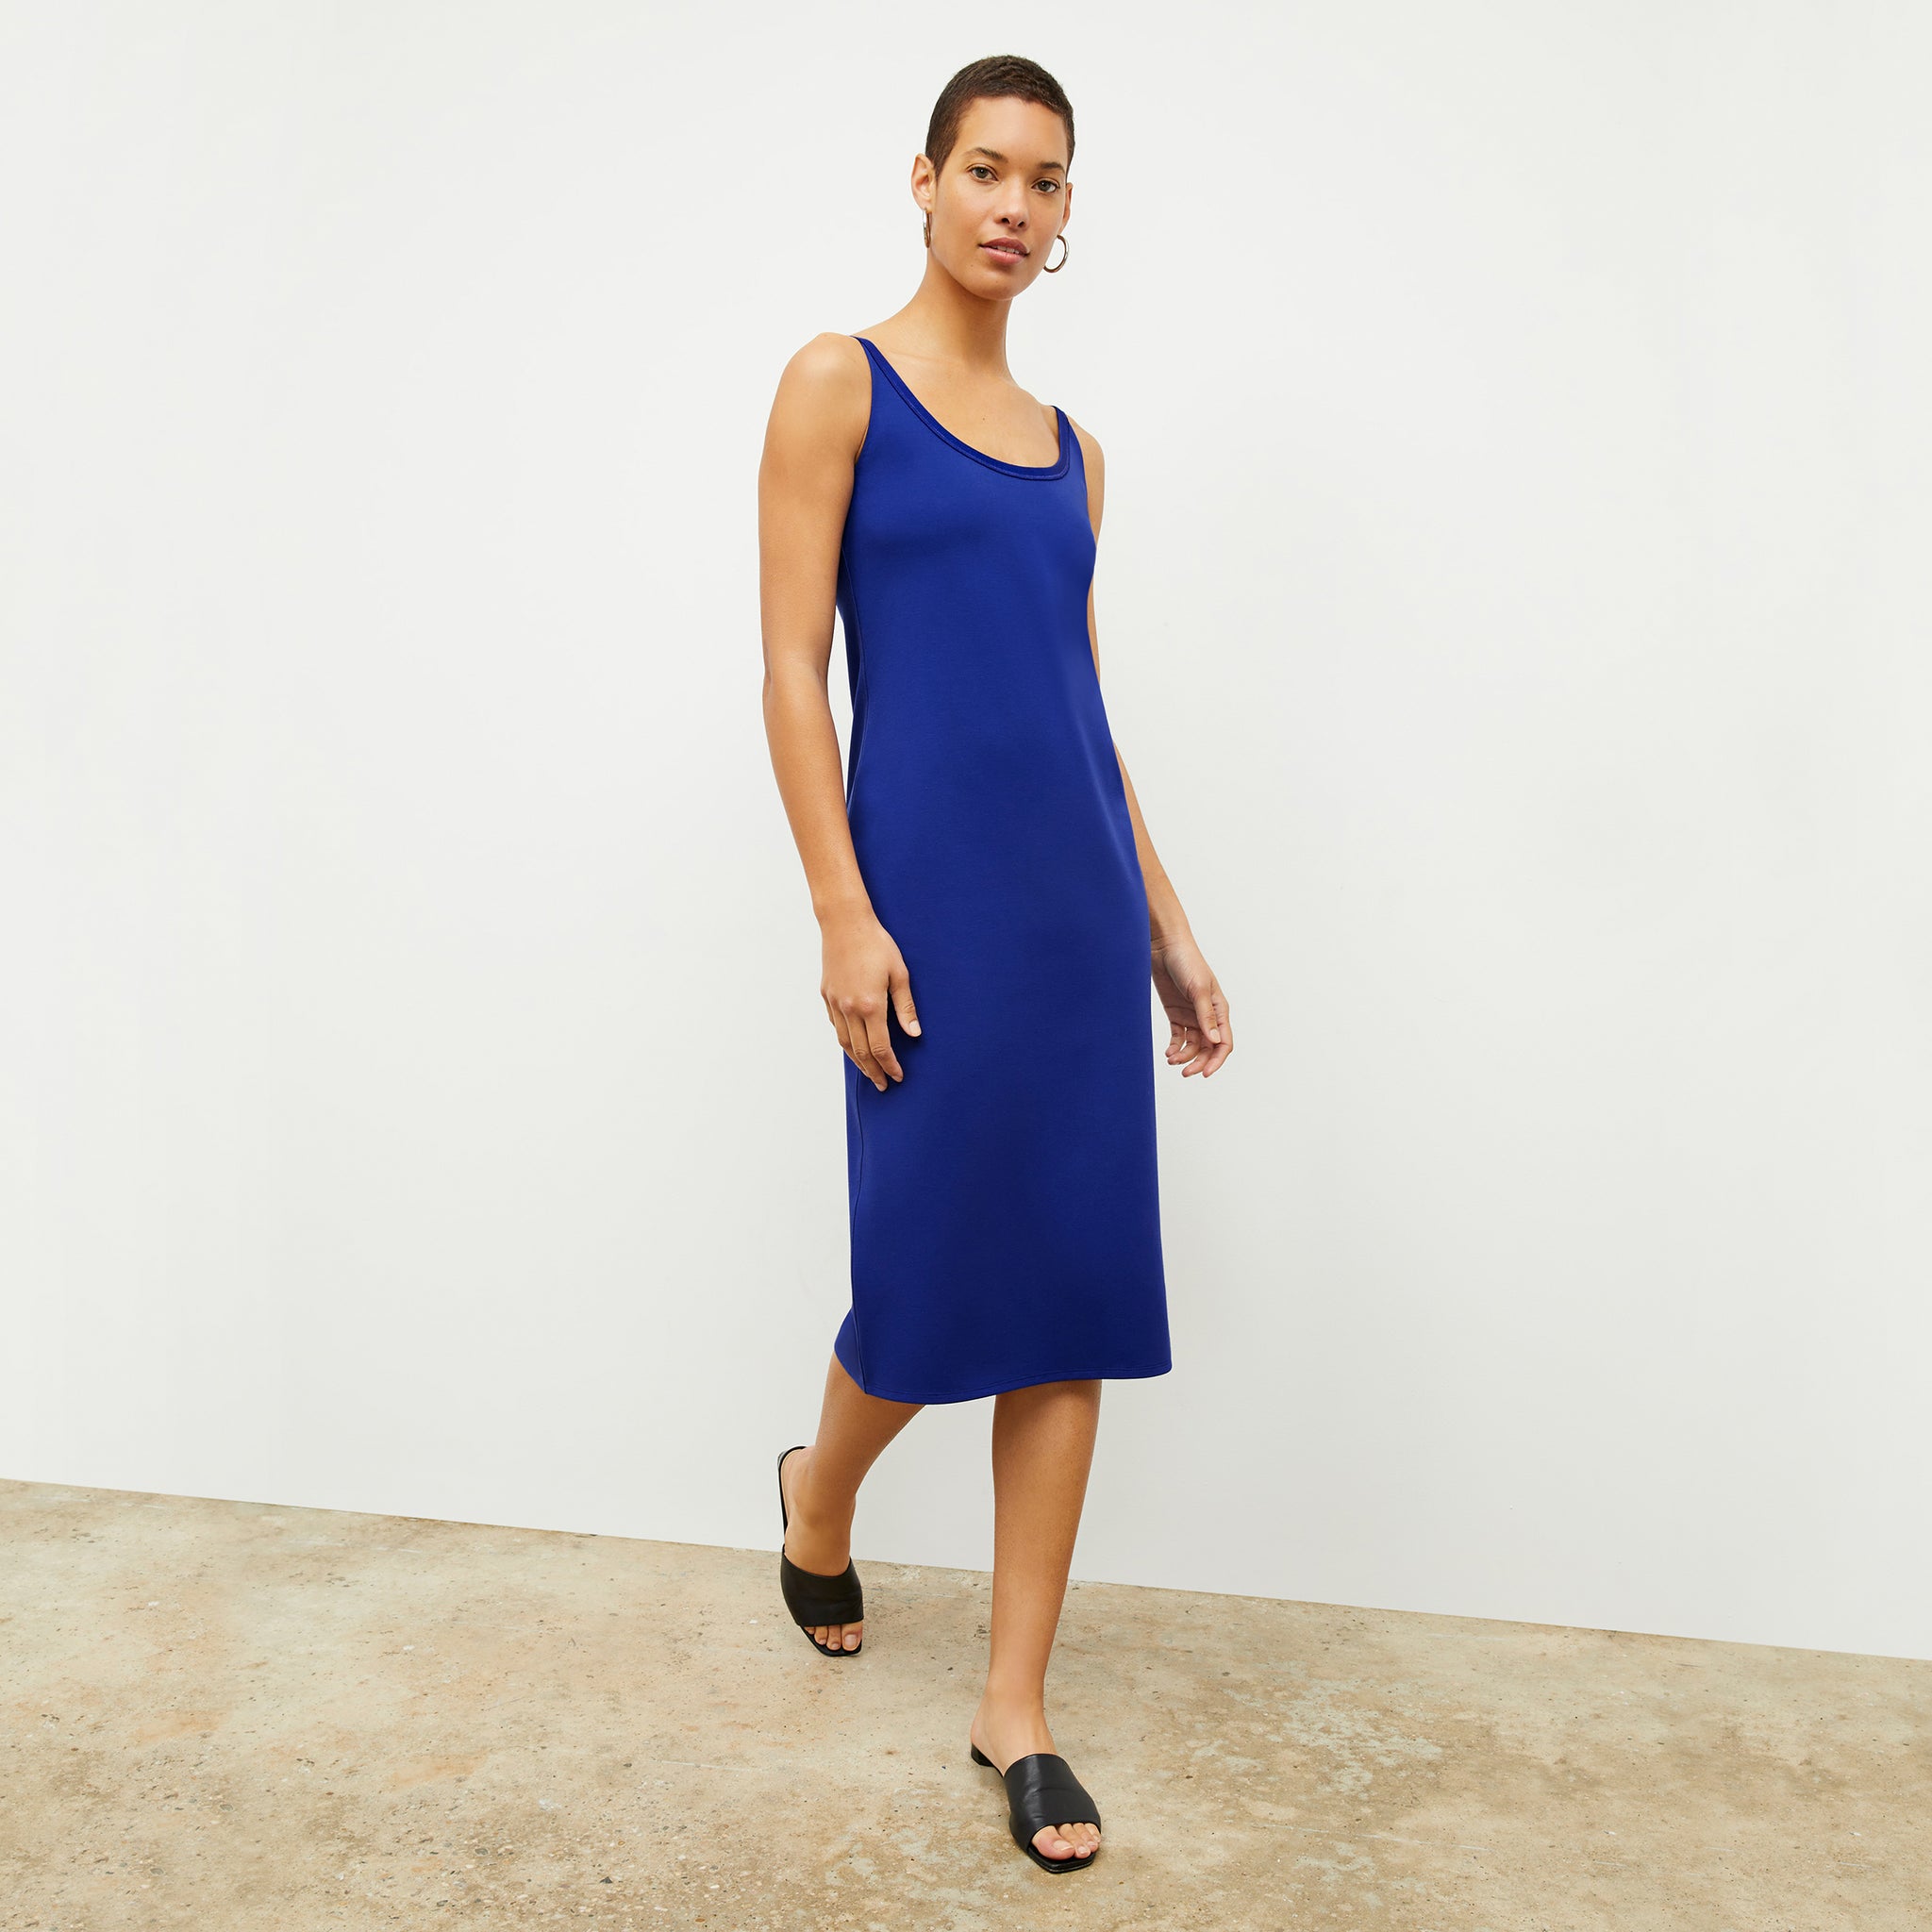 Contact Support  Electric blue pants, Electric blue dresses, Blue